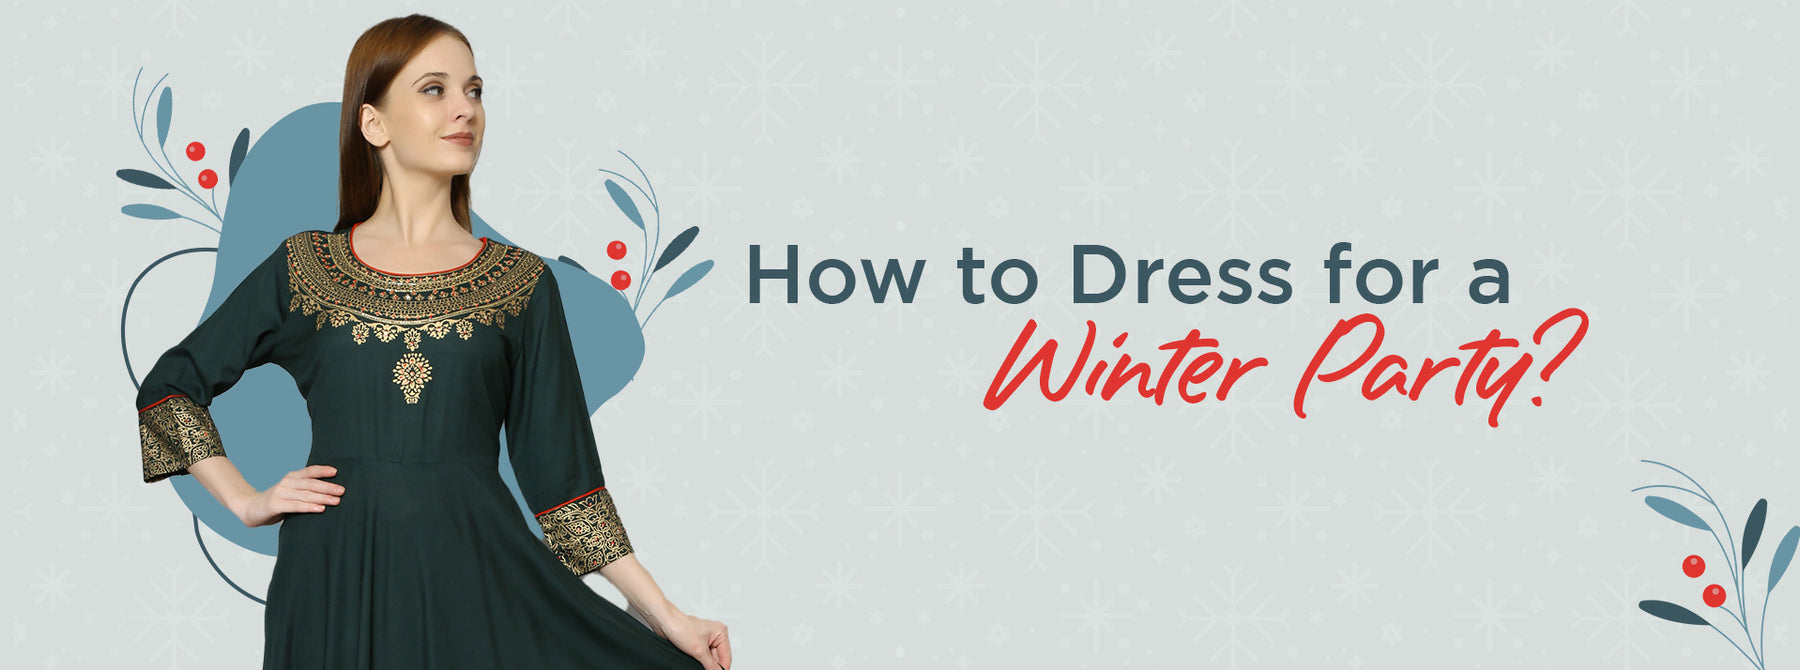 How to Dress for a Winter Party?